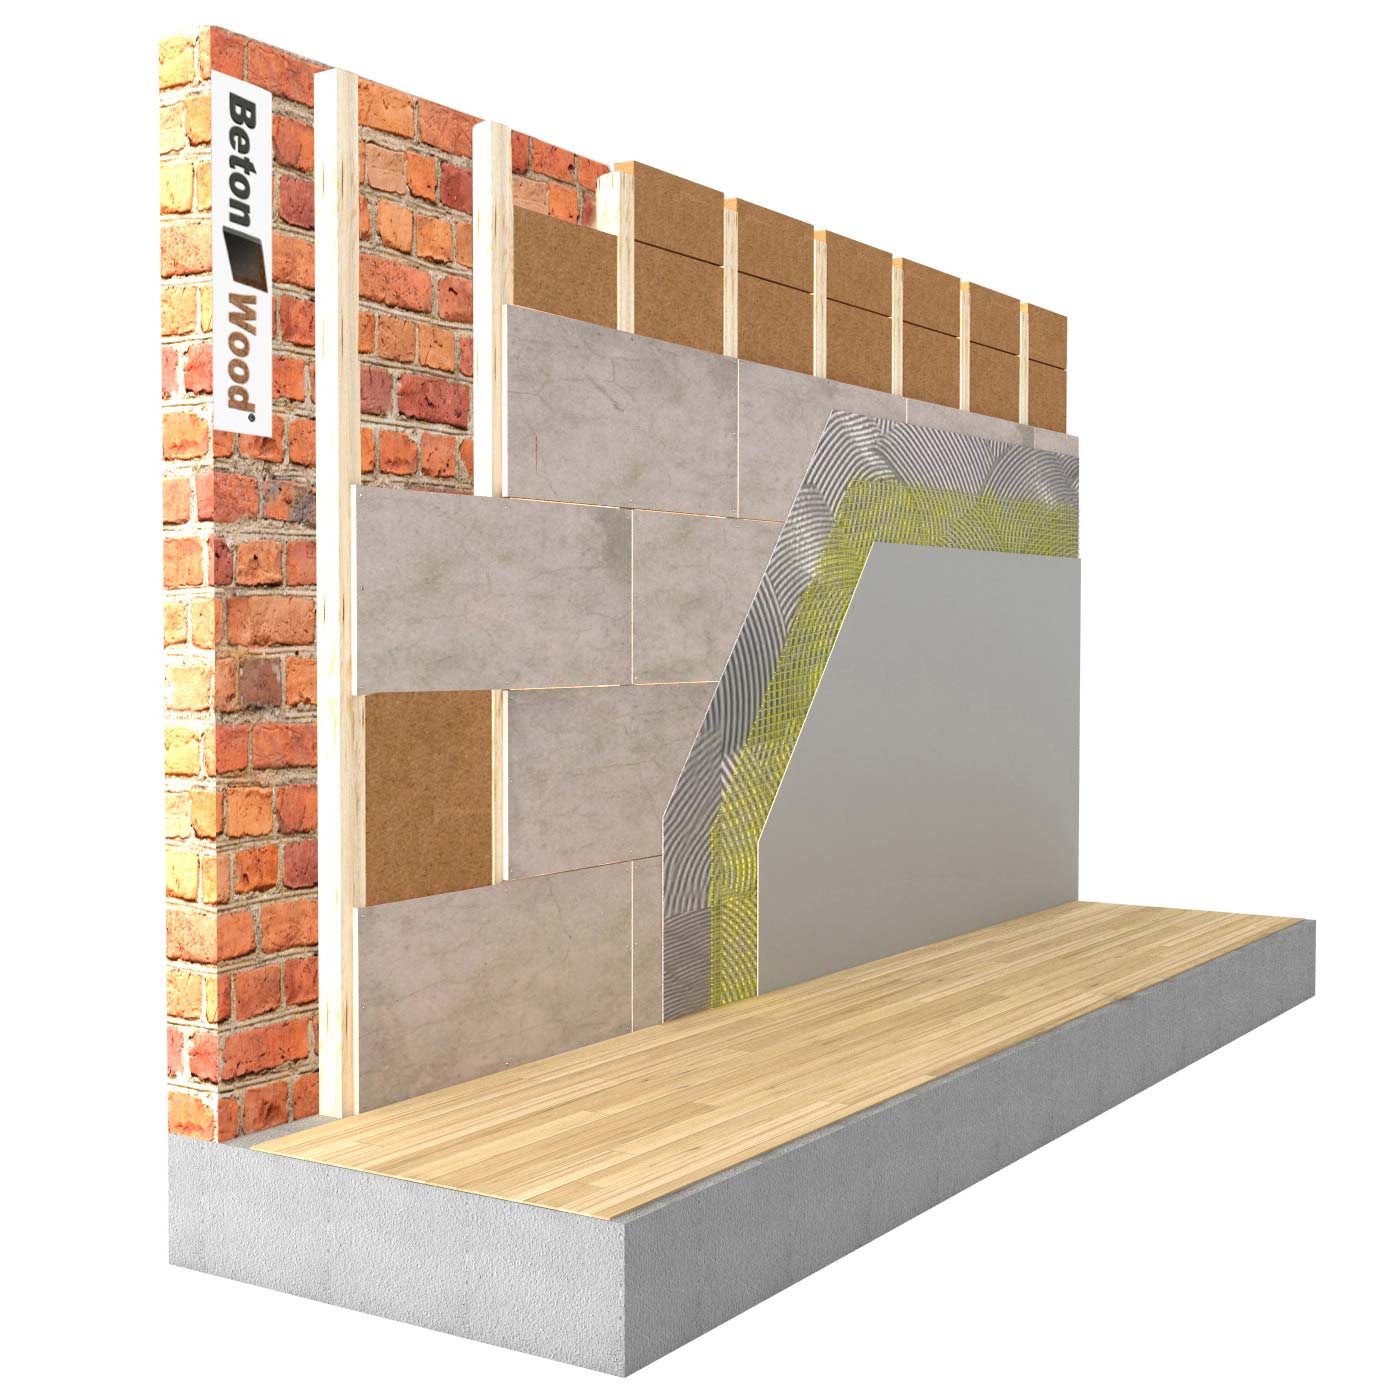 Internal insulation system in Protect Wood fiber and cement bonded particle board